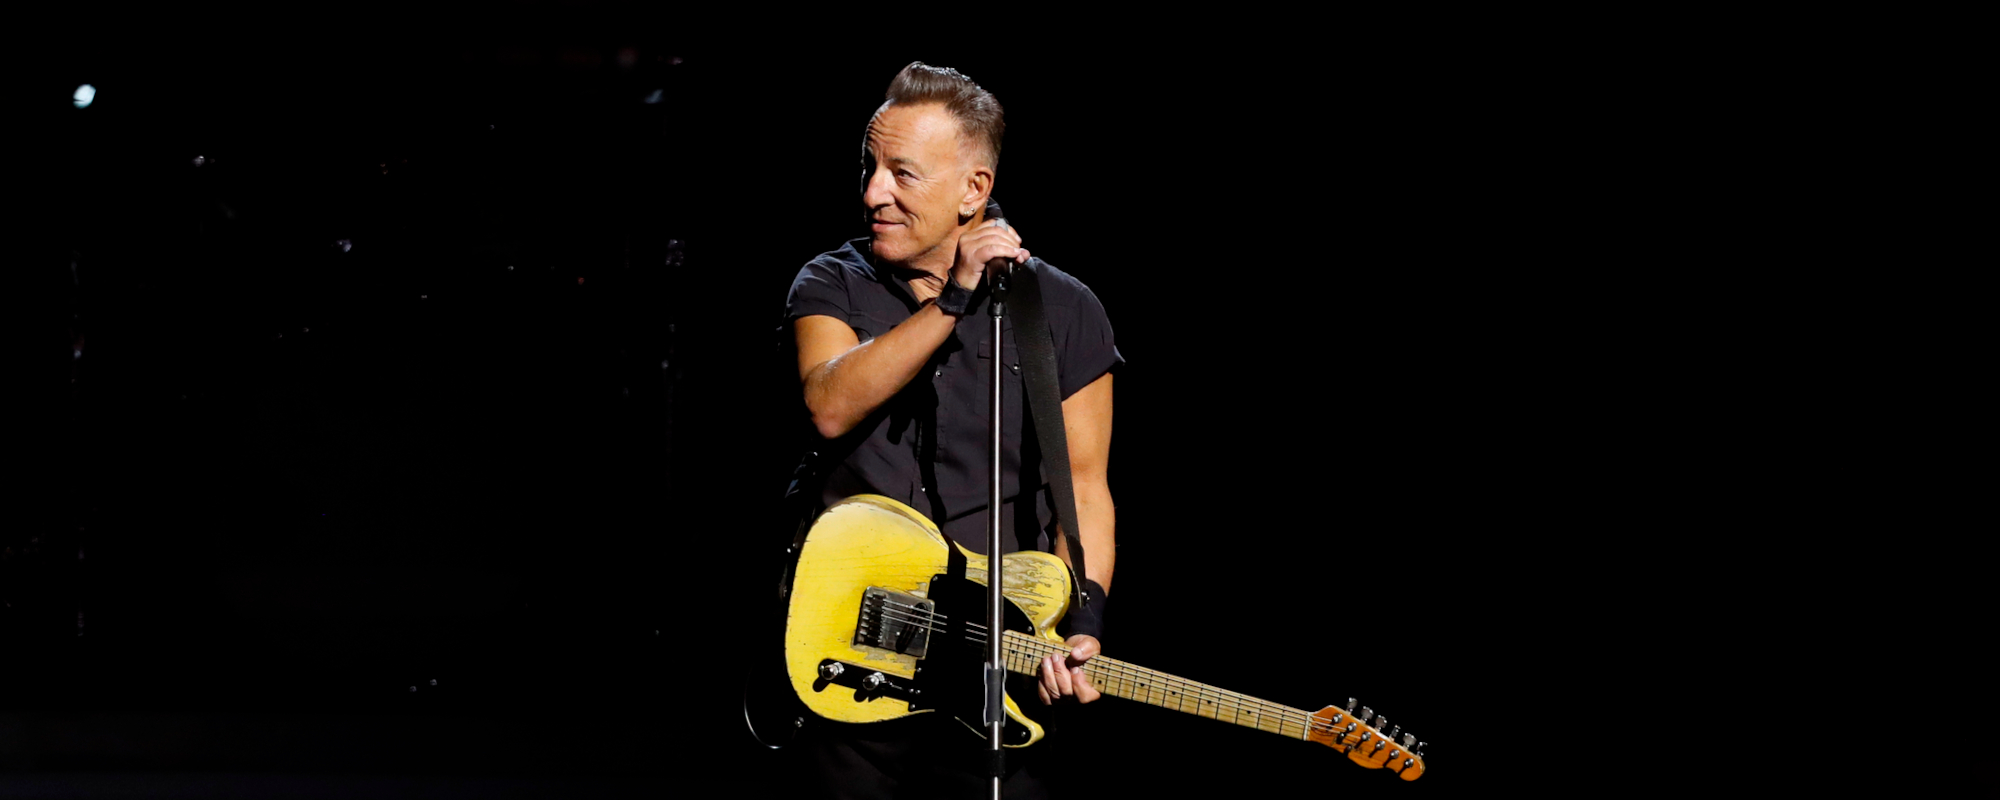 Bruce Springsteen Shares Soundcheck Photos from Recent Concert as He Recovers from Stomach Illness